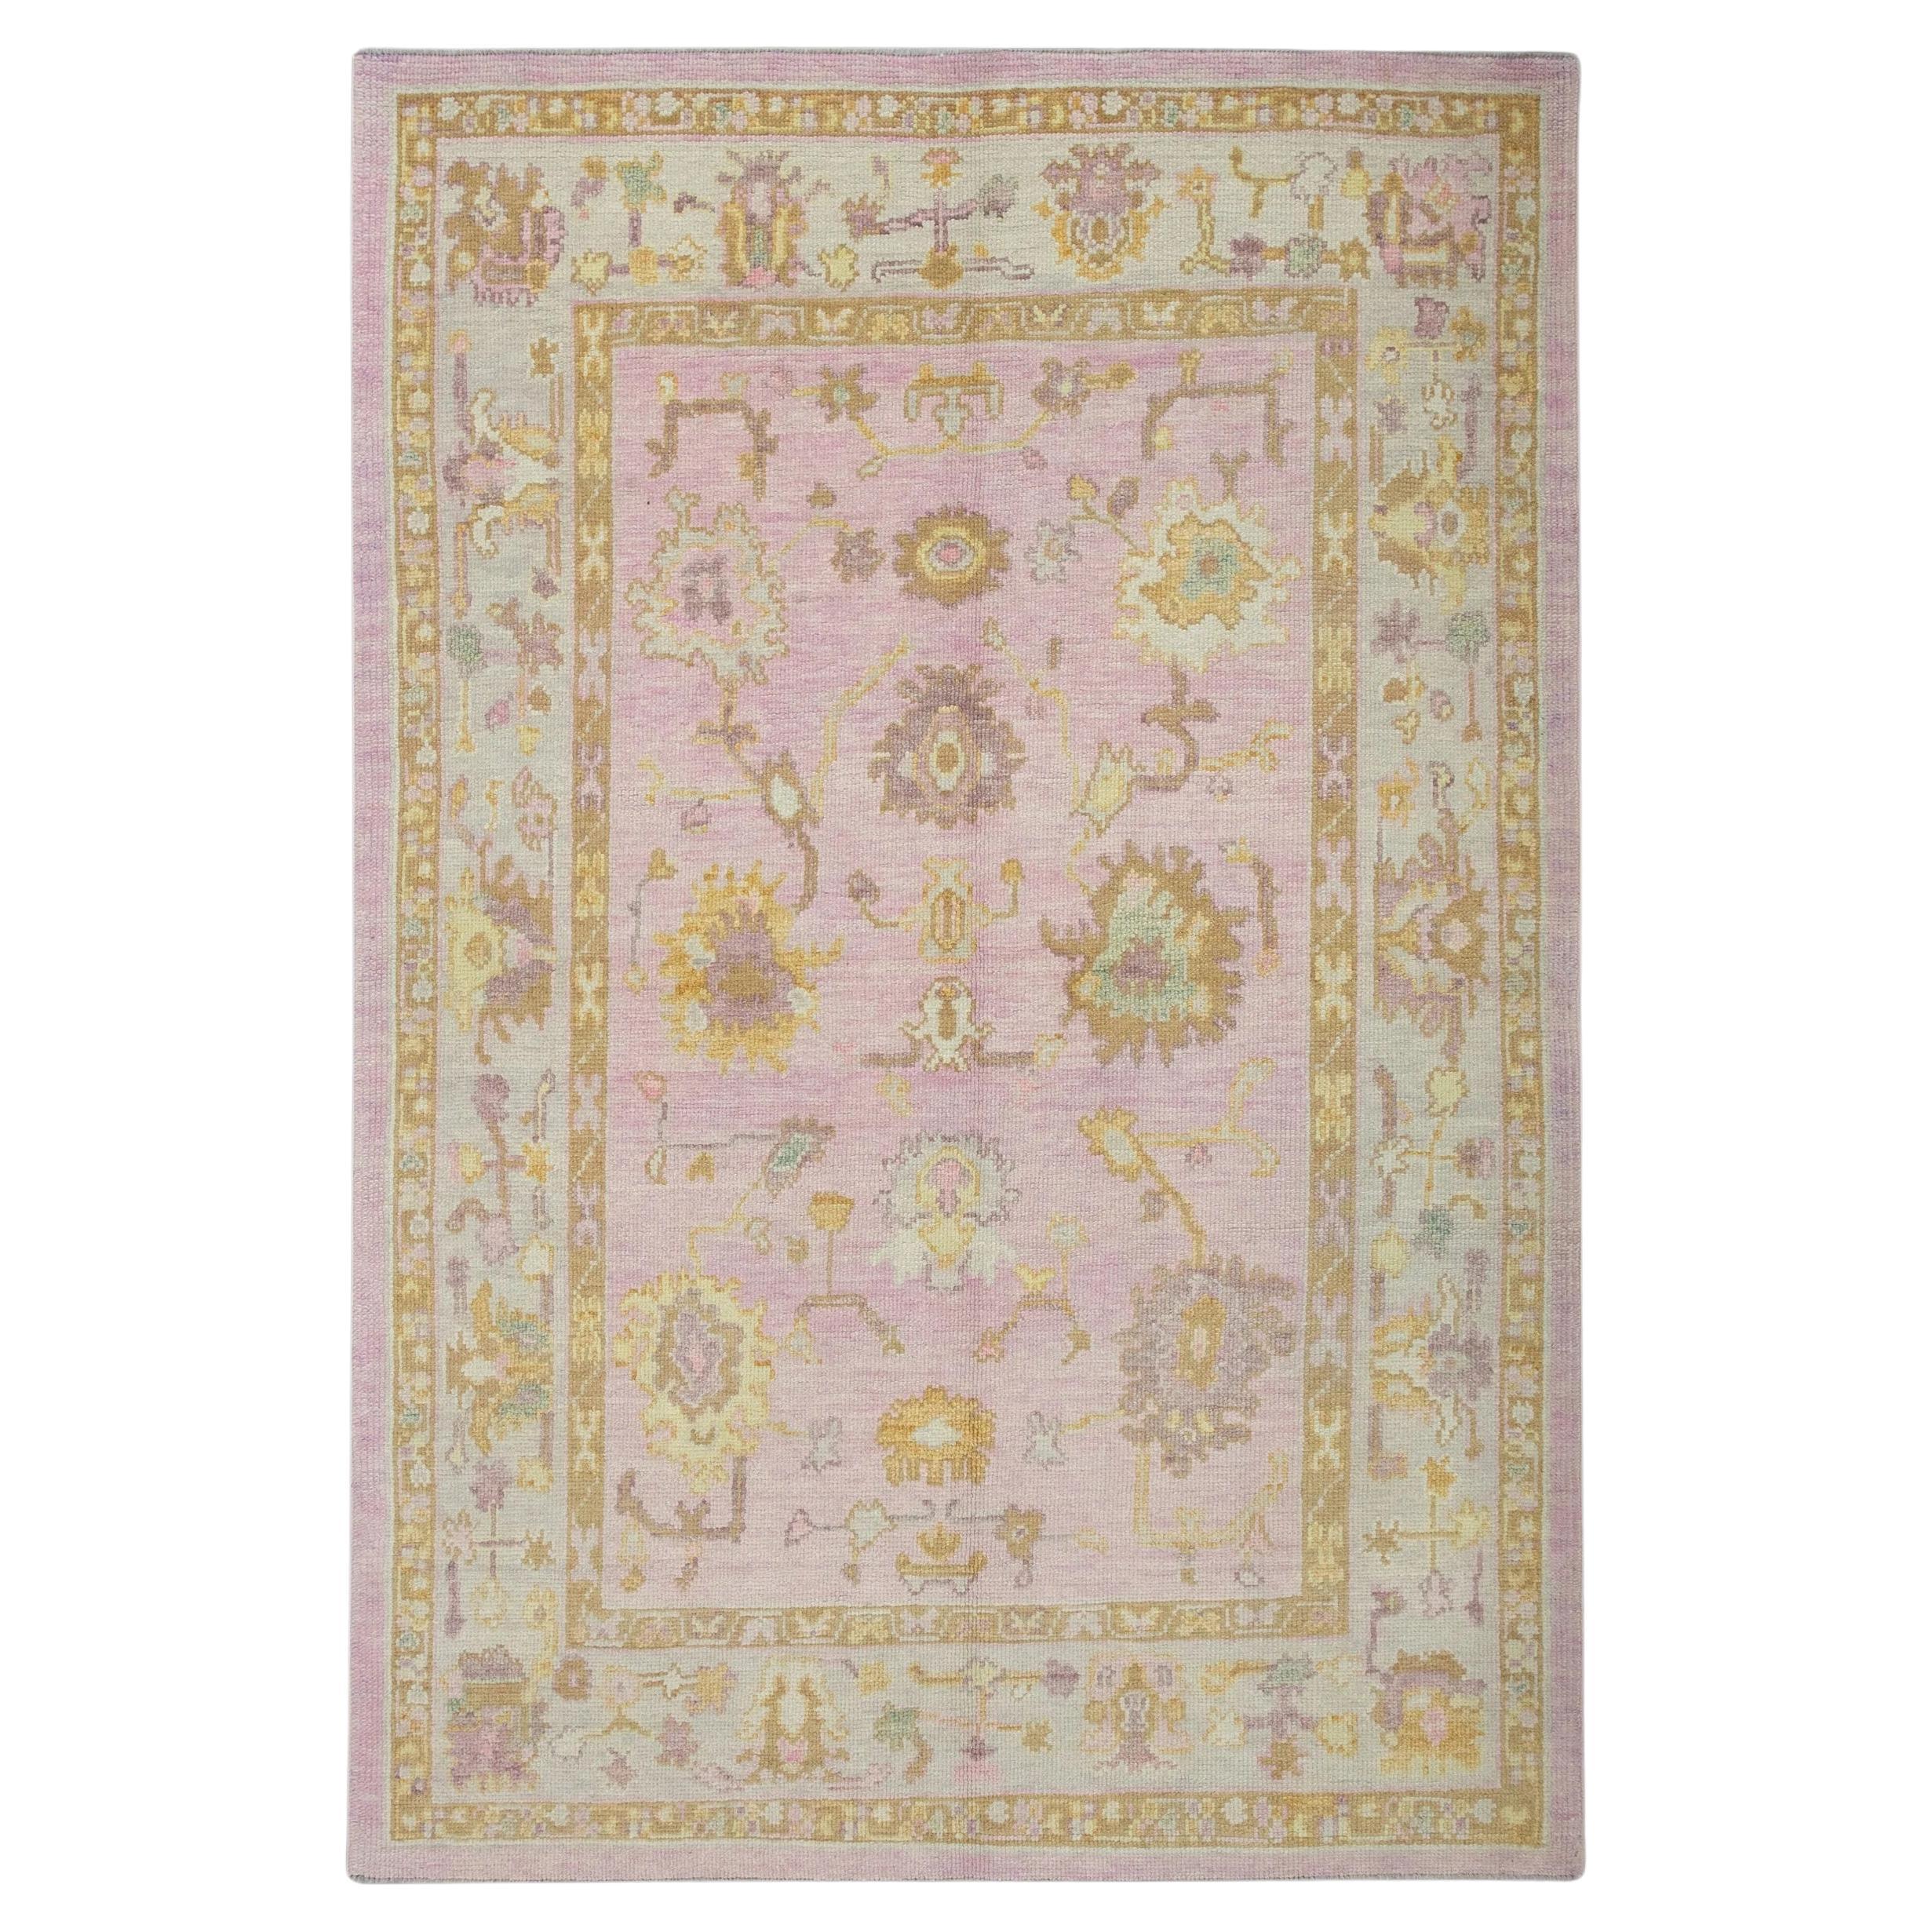 Floral Handwoven Wool Turkish Oushak Rug in Soft Pink and Yellow 5'3" x 7'2"